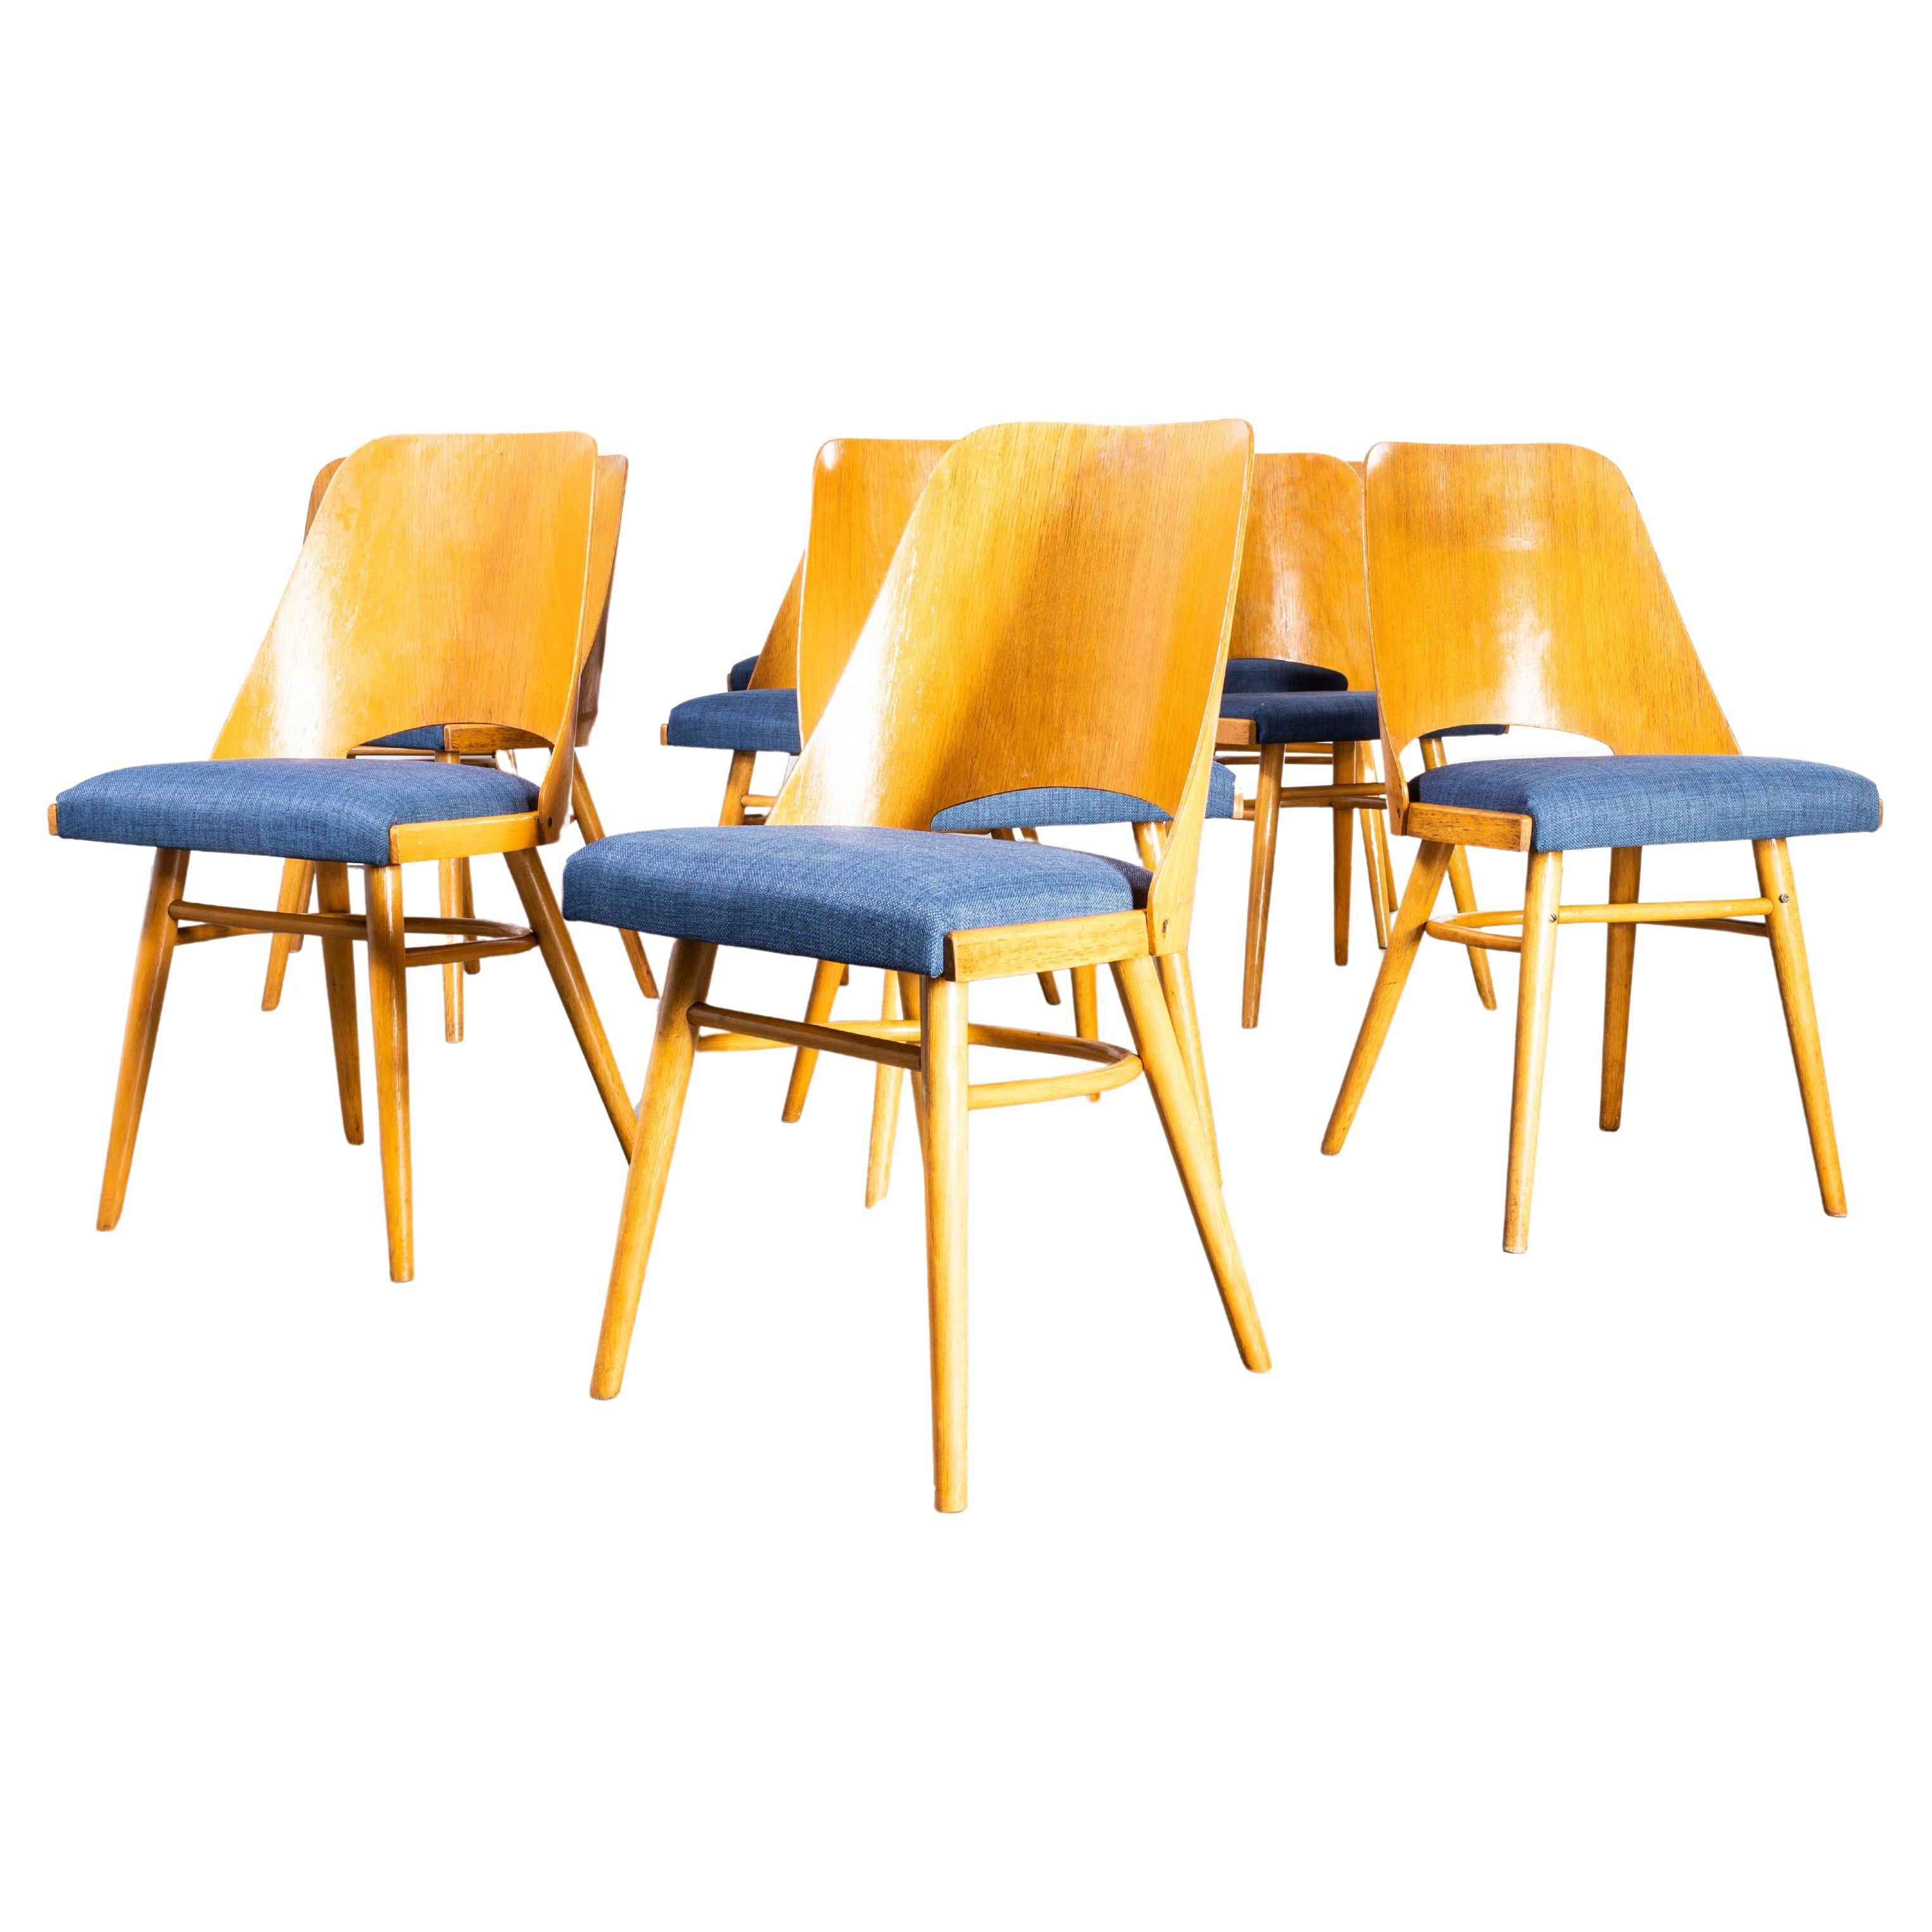 1950's Re -Upholstered Thon Light Oak Chairs By Radomir Hoffman - Set Of Ten For Sale